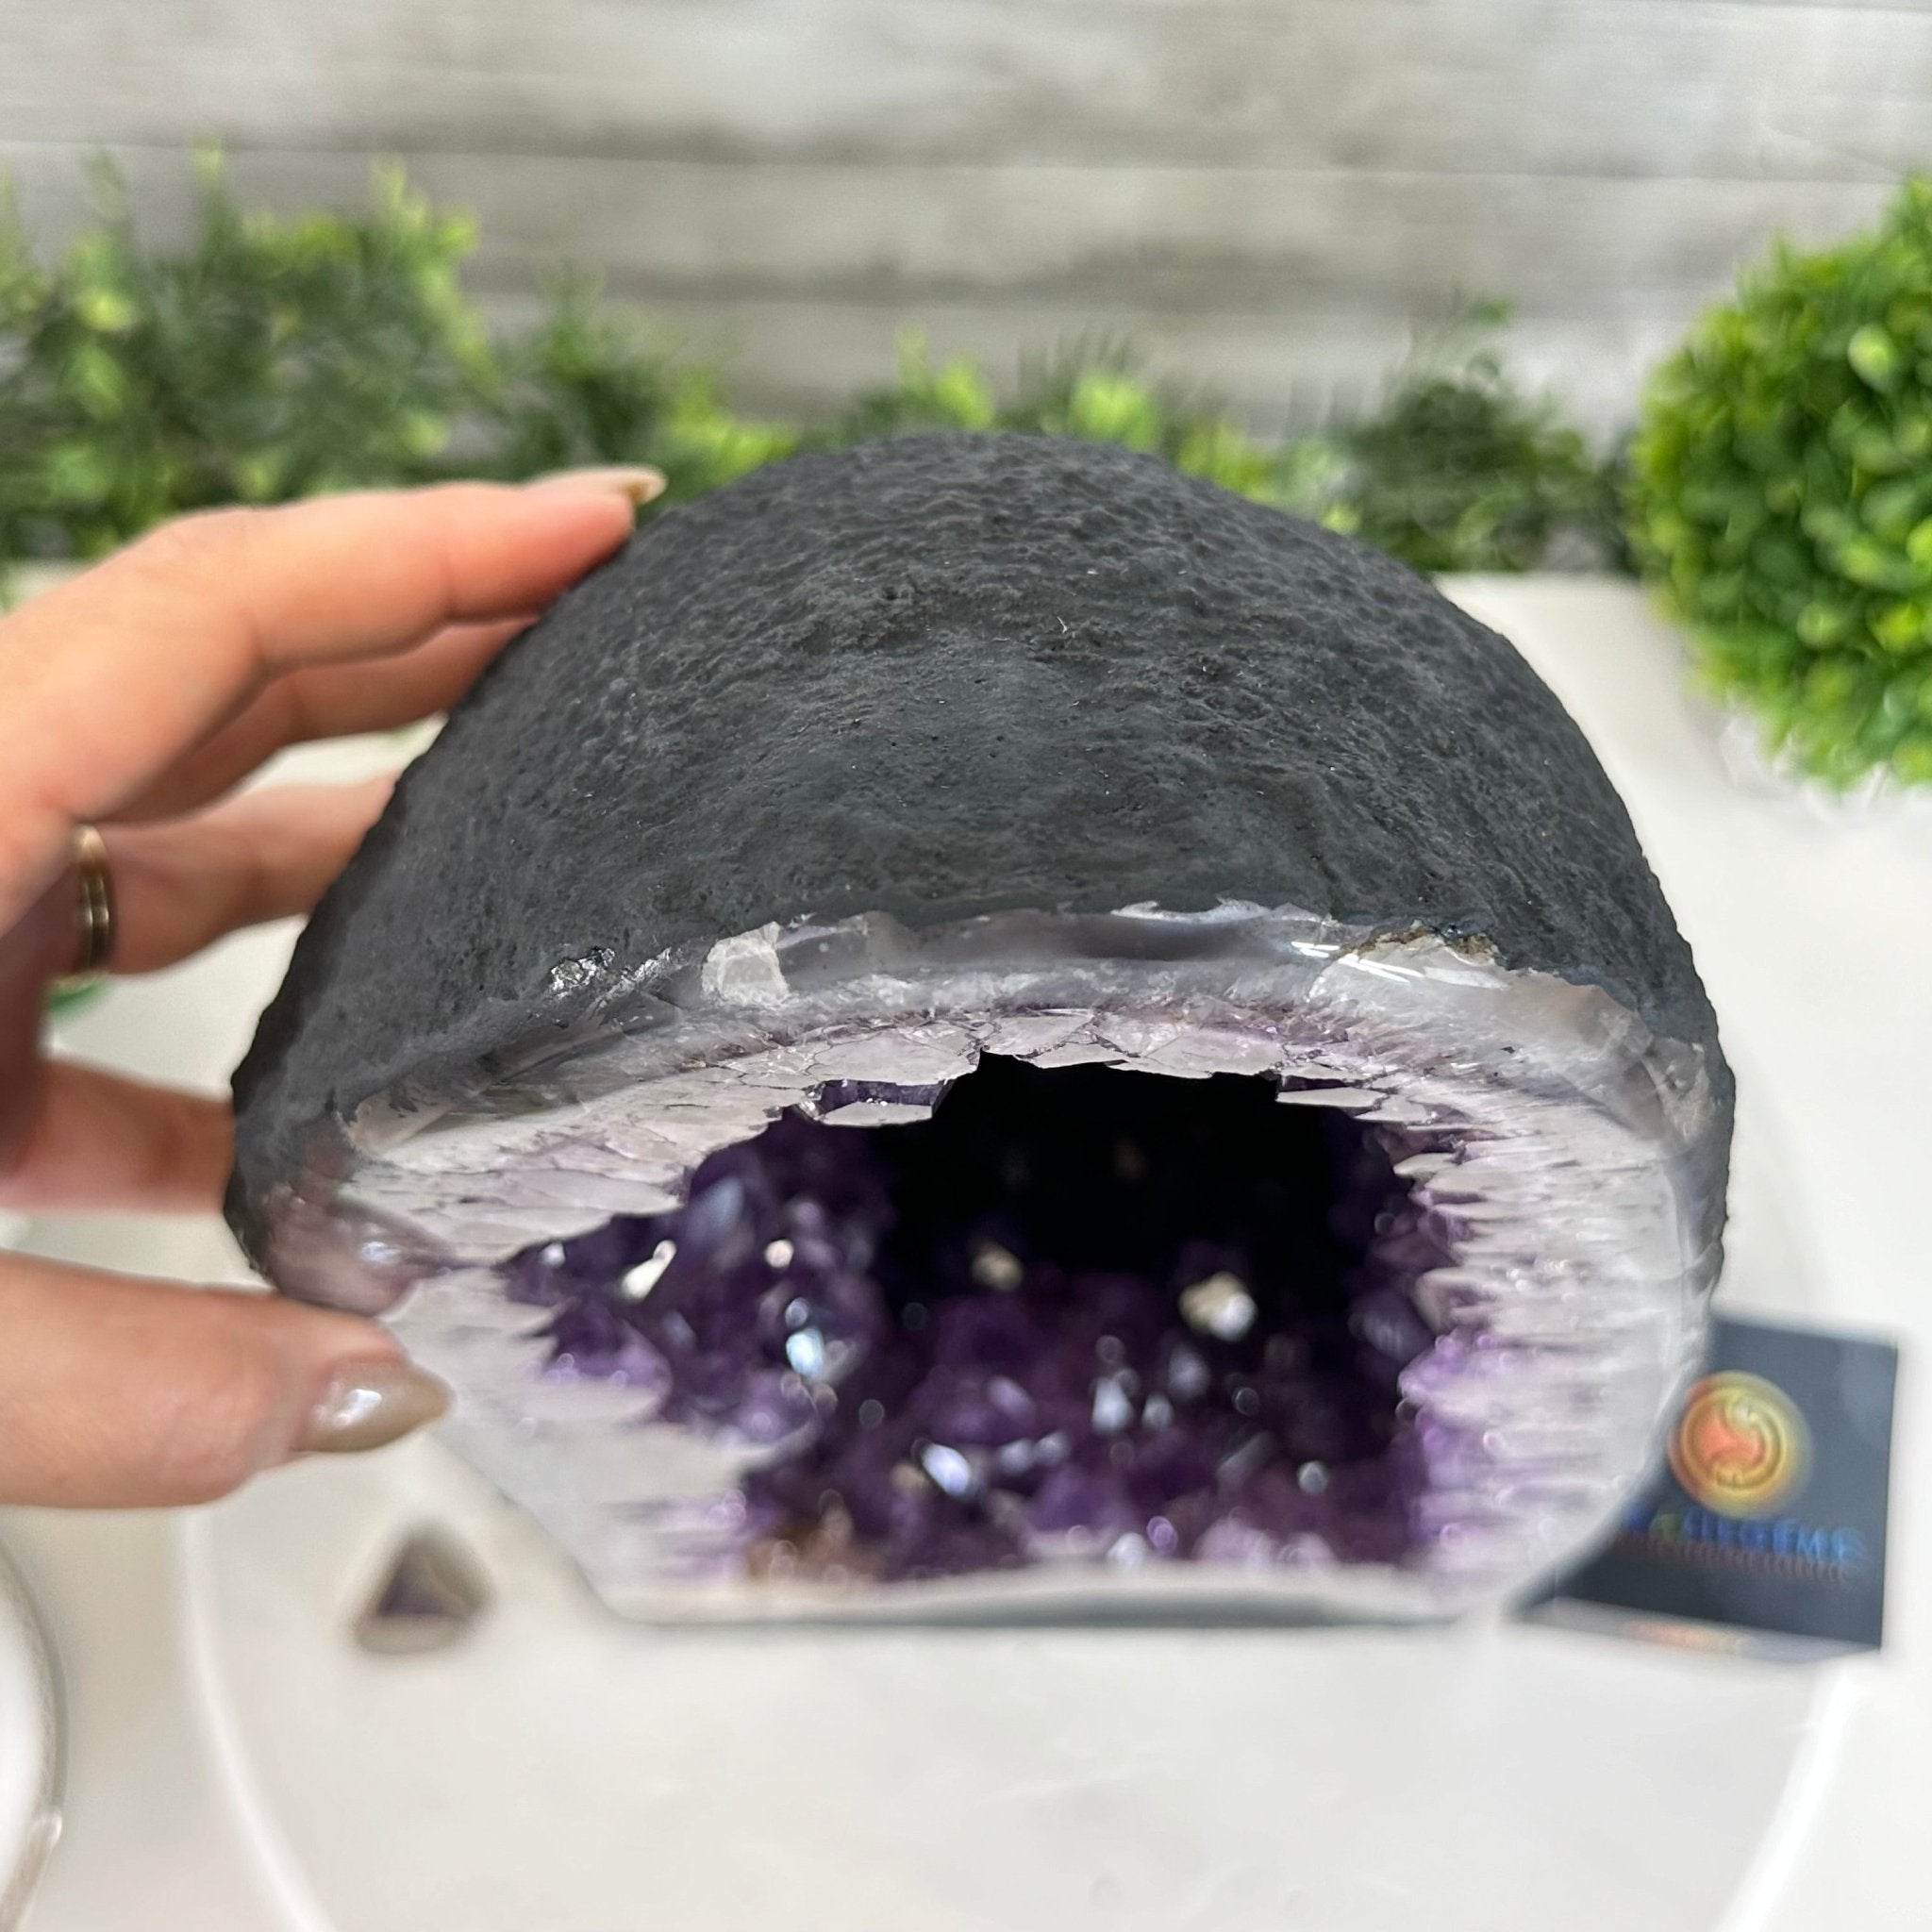 Quality Brazilian Amethyst Cathedral, 33.3 lbs & 17.2" Tall, #5601 - 1410 - Brazil GemsBrazil GemsQuality Brazilian Amethyst Cathedral, 33.3 lbs & 17.2" Tall, #5601 - 1410Cathedrals5601 - 1410